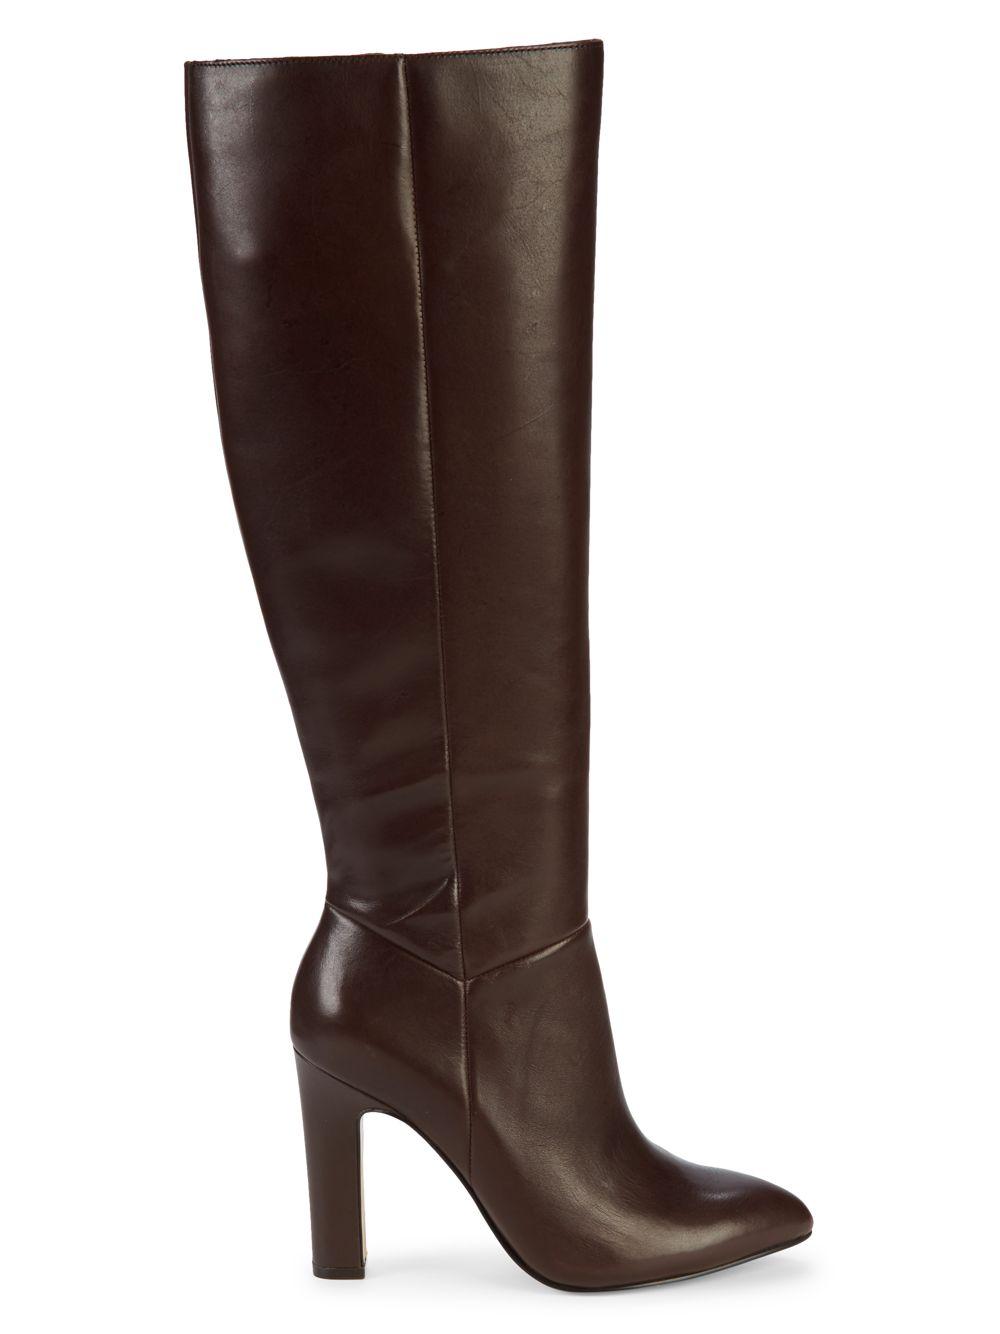 Saks Fifth Avenue Kortnee Leather Knee-high Boots in Brown - Lyst